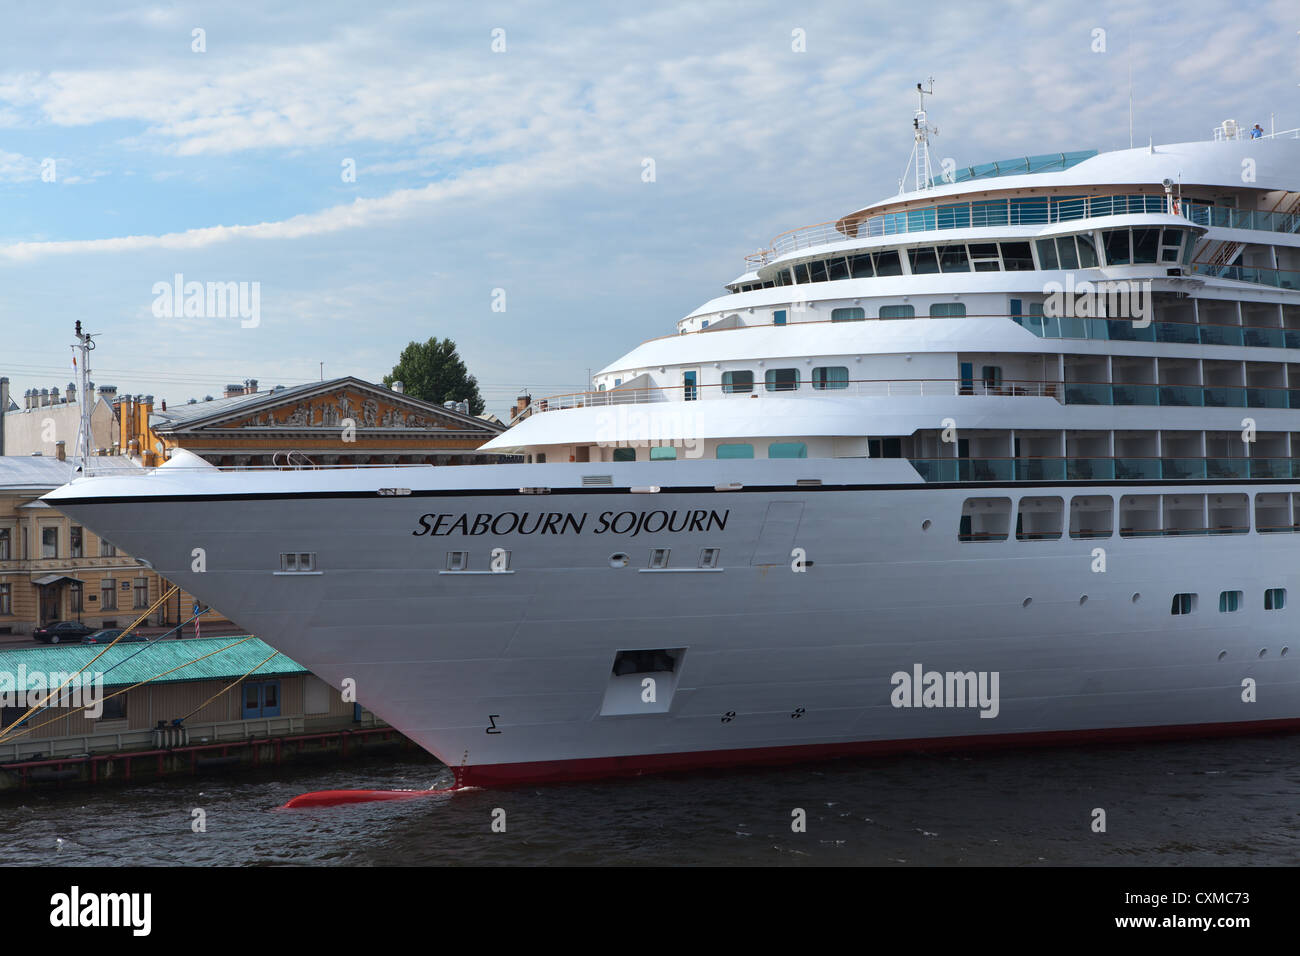 The Seabourn Sojourn ship on Saint-Petersburg English embankment floating on circa August, 2012 in Saint Petersburg, Russia Stock Photo